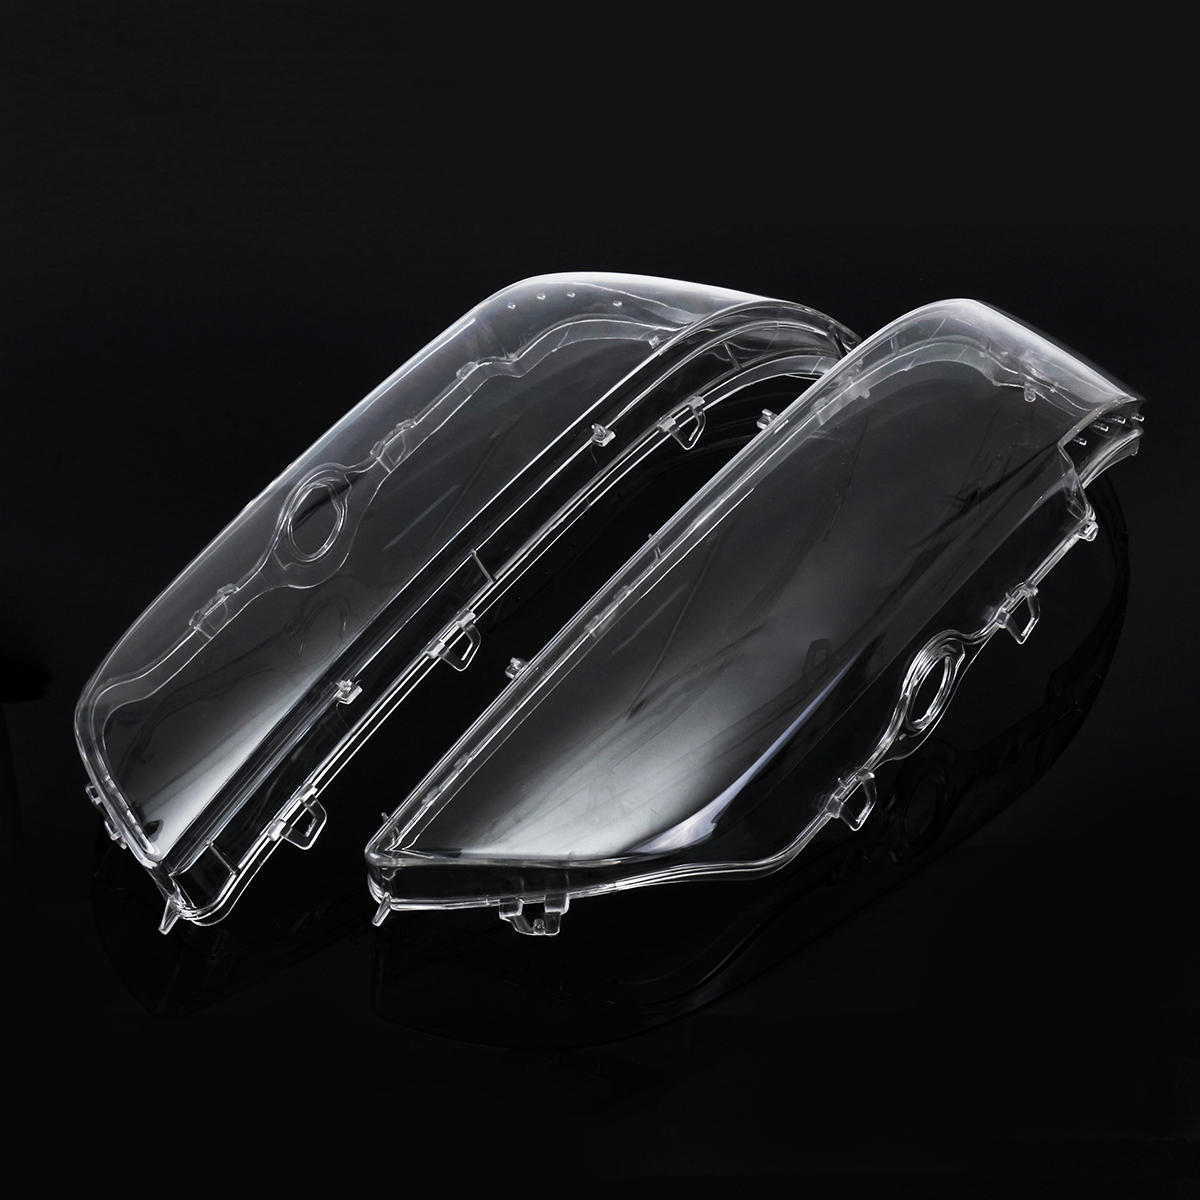 Image of Car Clear Headlight Lens Cover ABS Pair for BMW E39 Facelift 1996-2003 63128375302